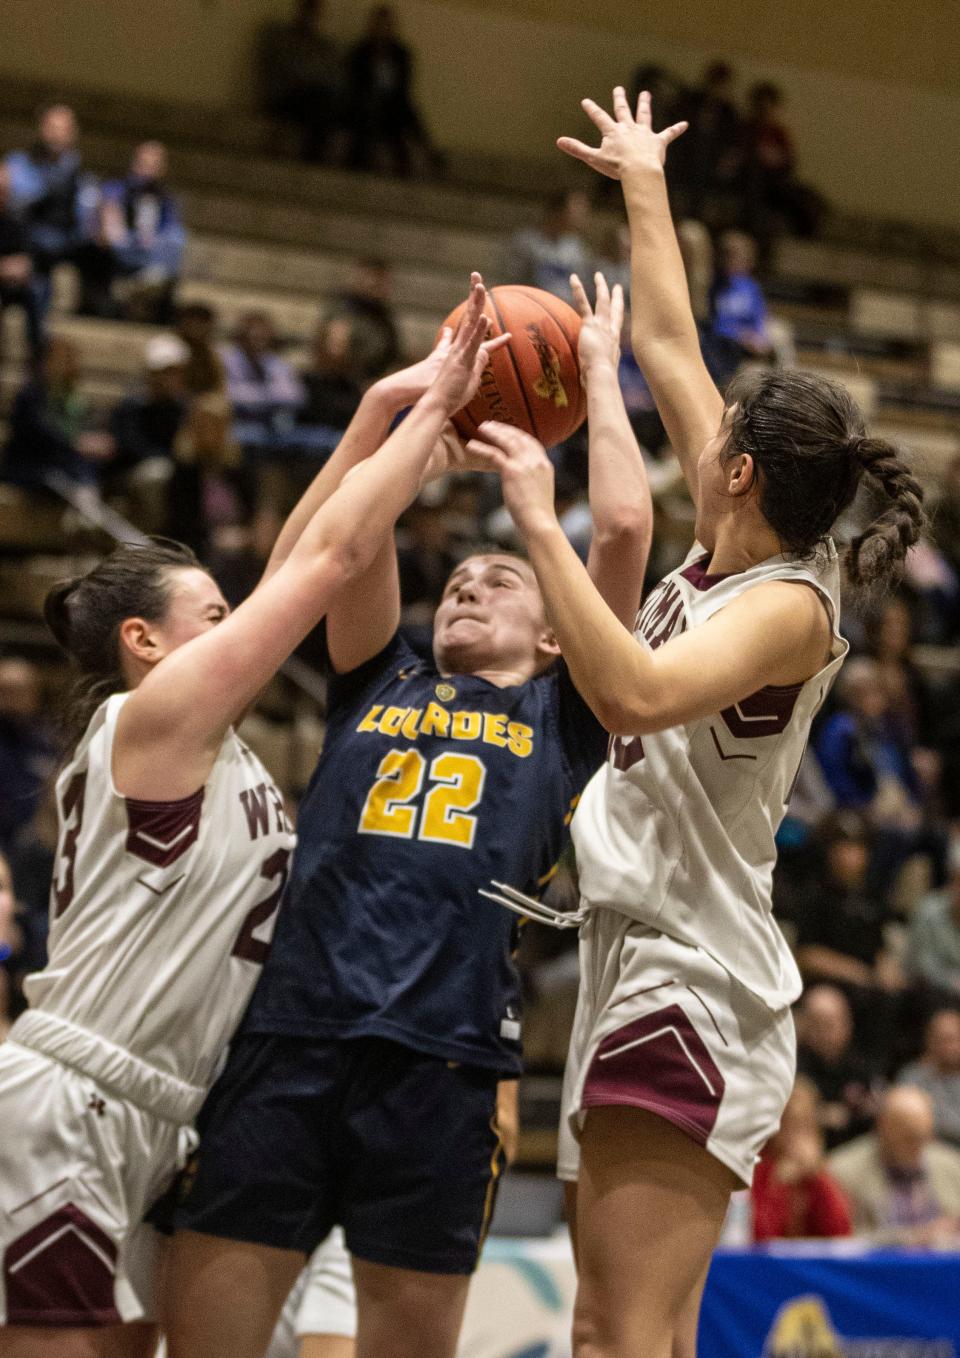 Simone Pelish of Our Lady of Lourdes is fouled by Brianna Verga of Walt Whitman during a New York State girls Class AAA basketball semifinal against at Hudson Valley Community College in Troy March 16, 2024. Lourdes defeated Walt Whitman 60-51 to advance to the Class AAA final on Sunday.